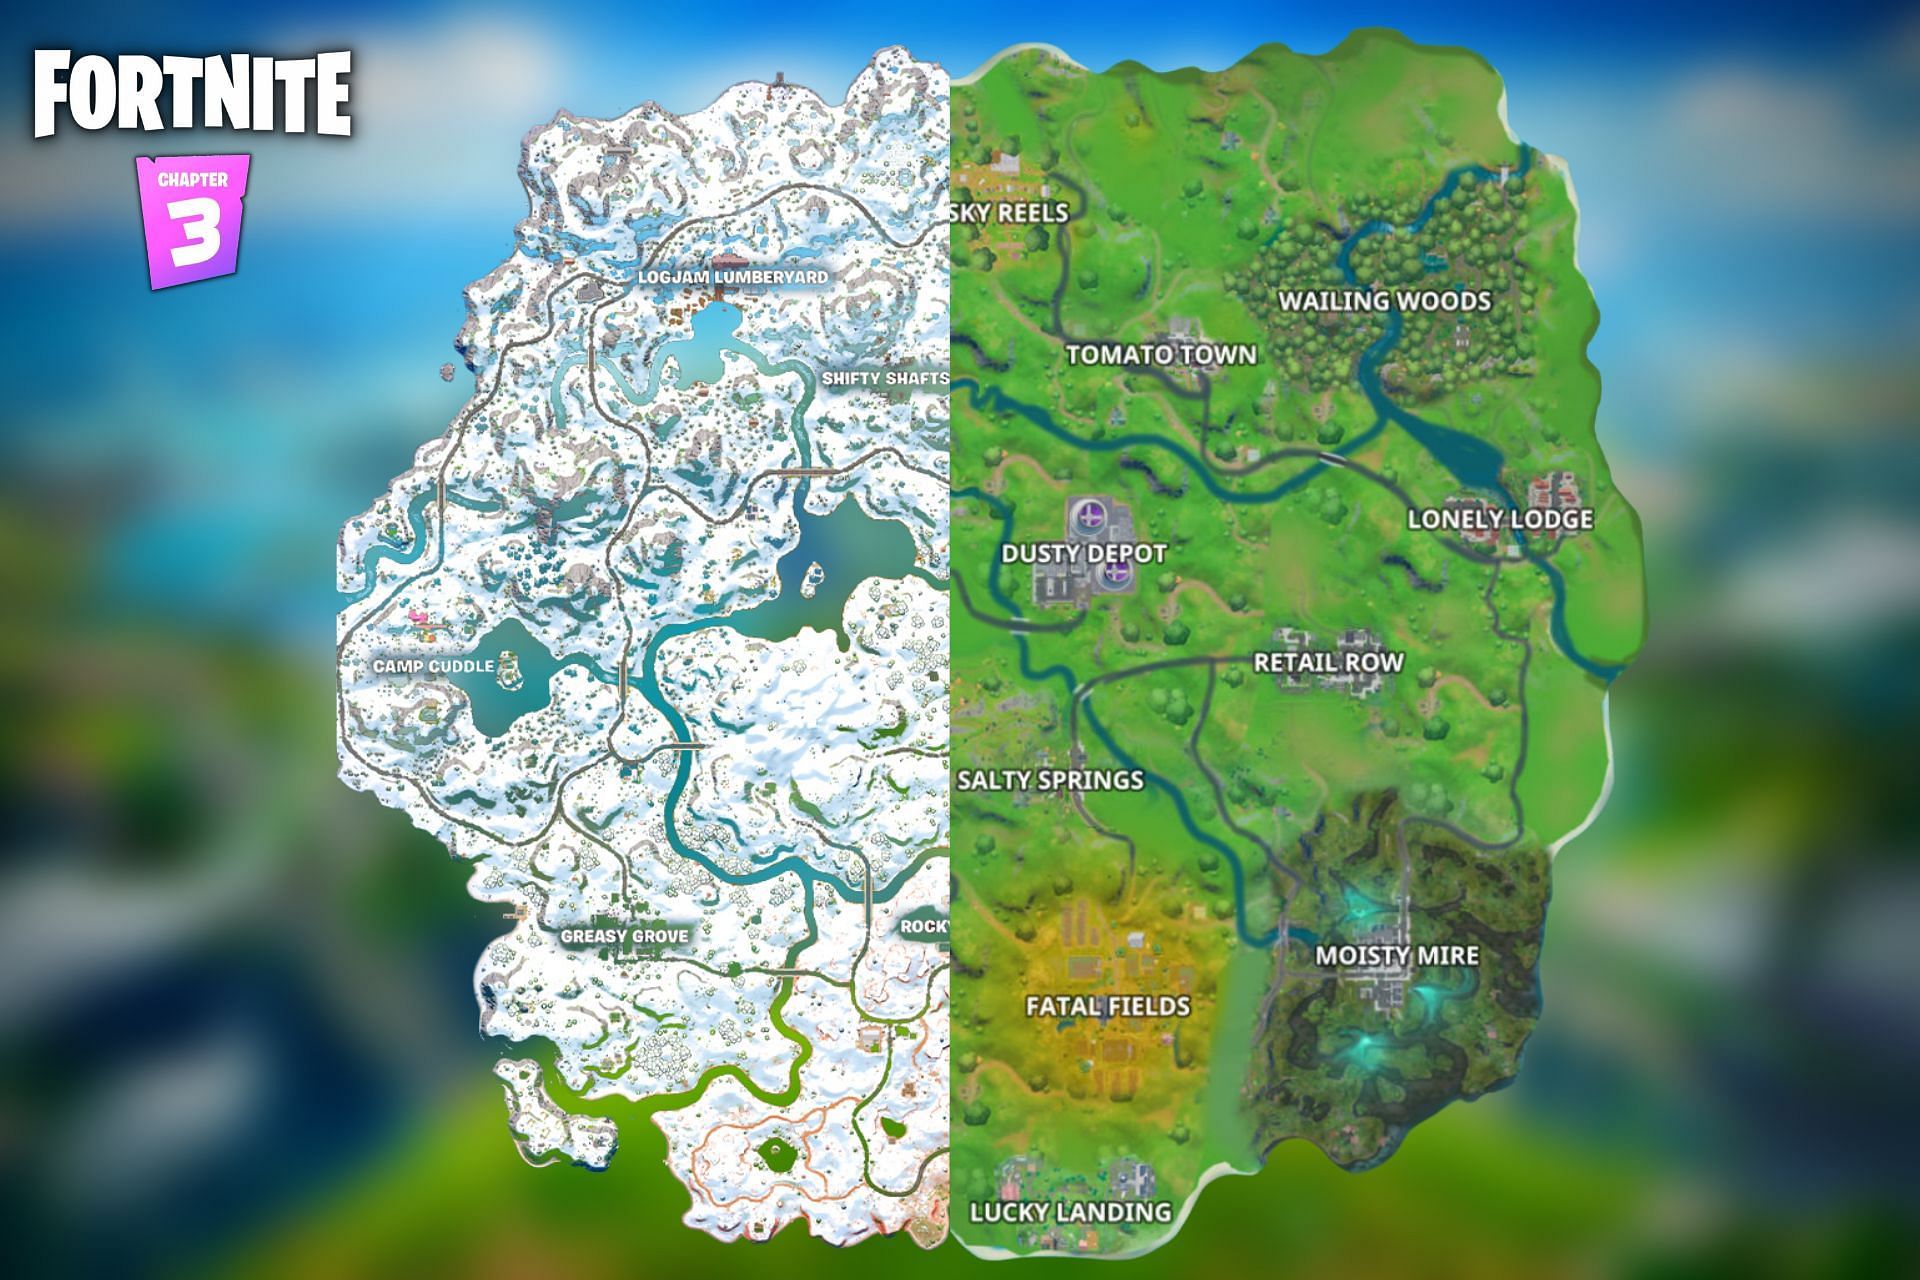 New theory suggests Fortnite Chapter 3 map is the same as Chapter 1 (Image via Sportskeeda)